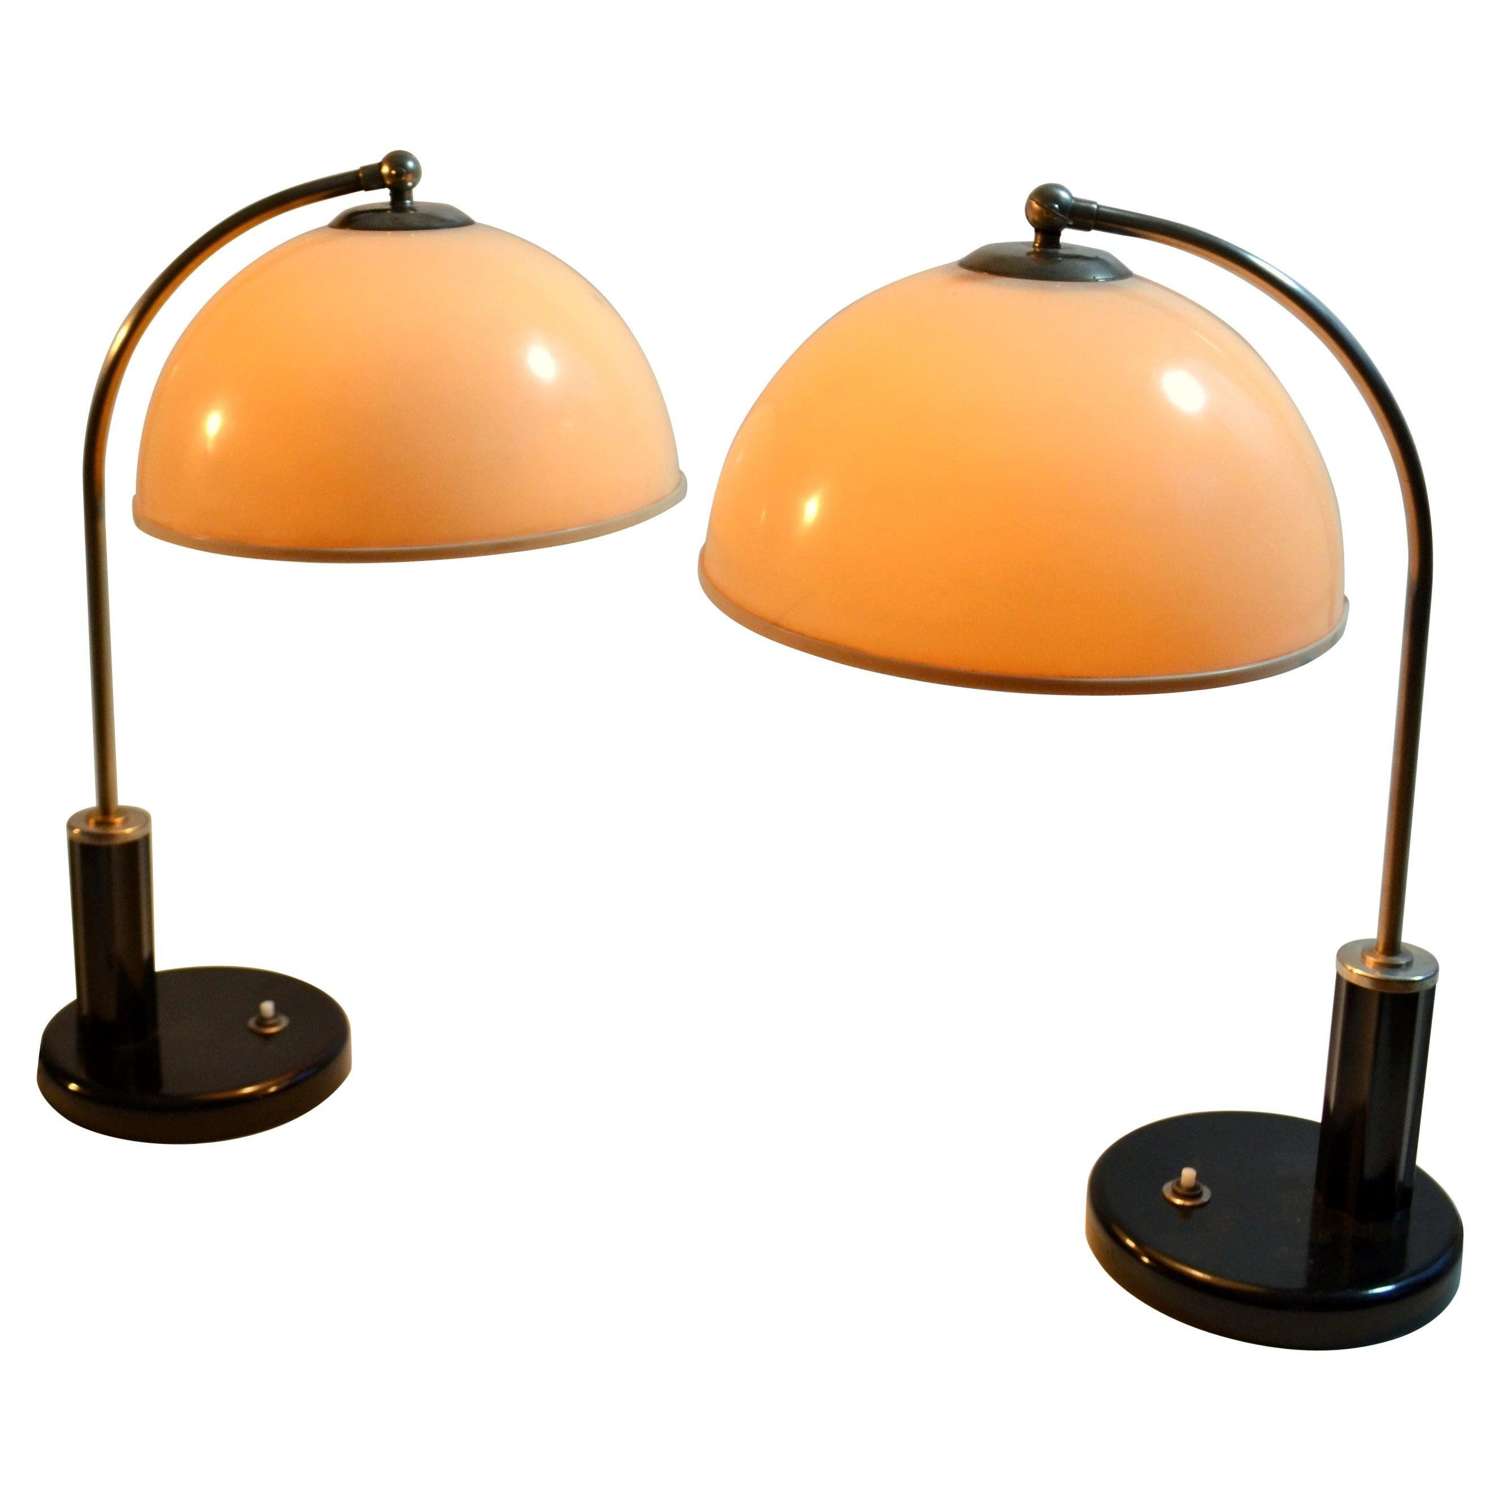 Pair of 1930's Bakelite Table Lamps Black and White by Kurt Zeisse